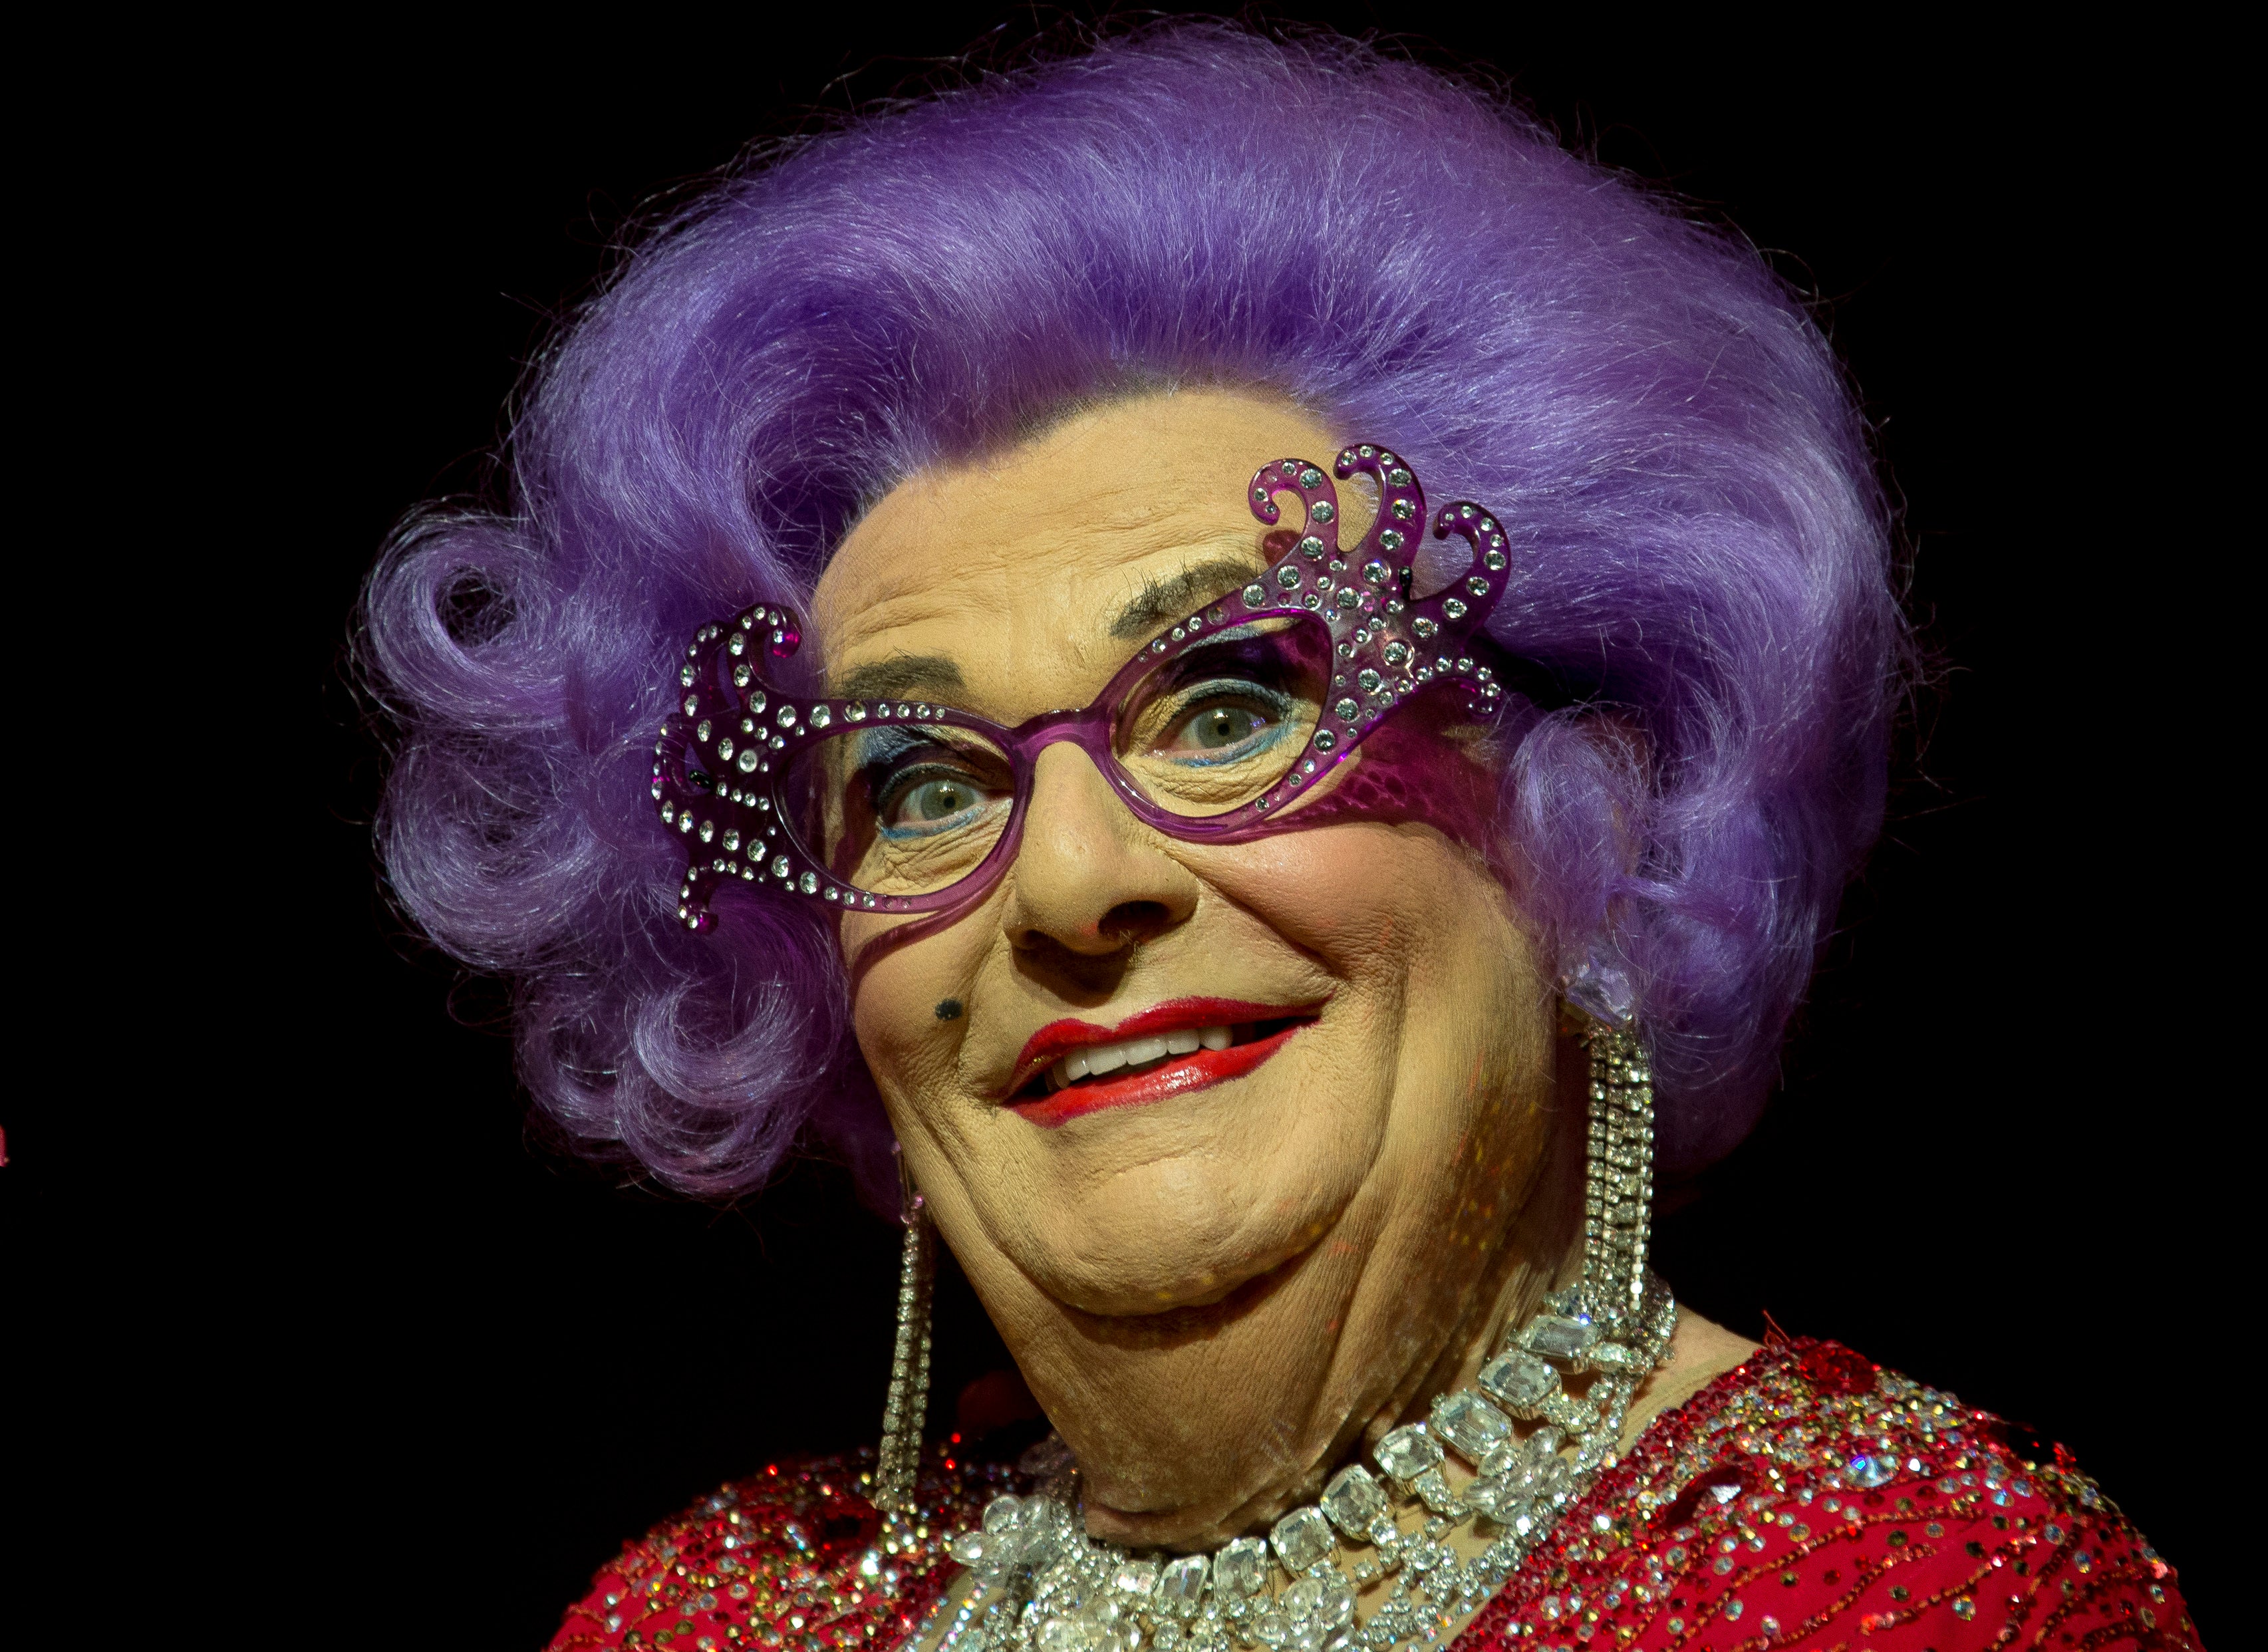 Dame Edna was a beloved character for generations of comedy-lovers